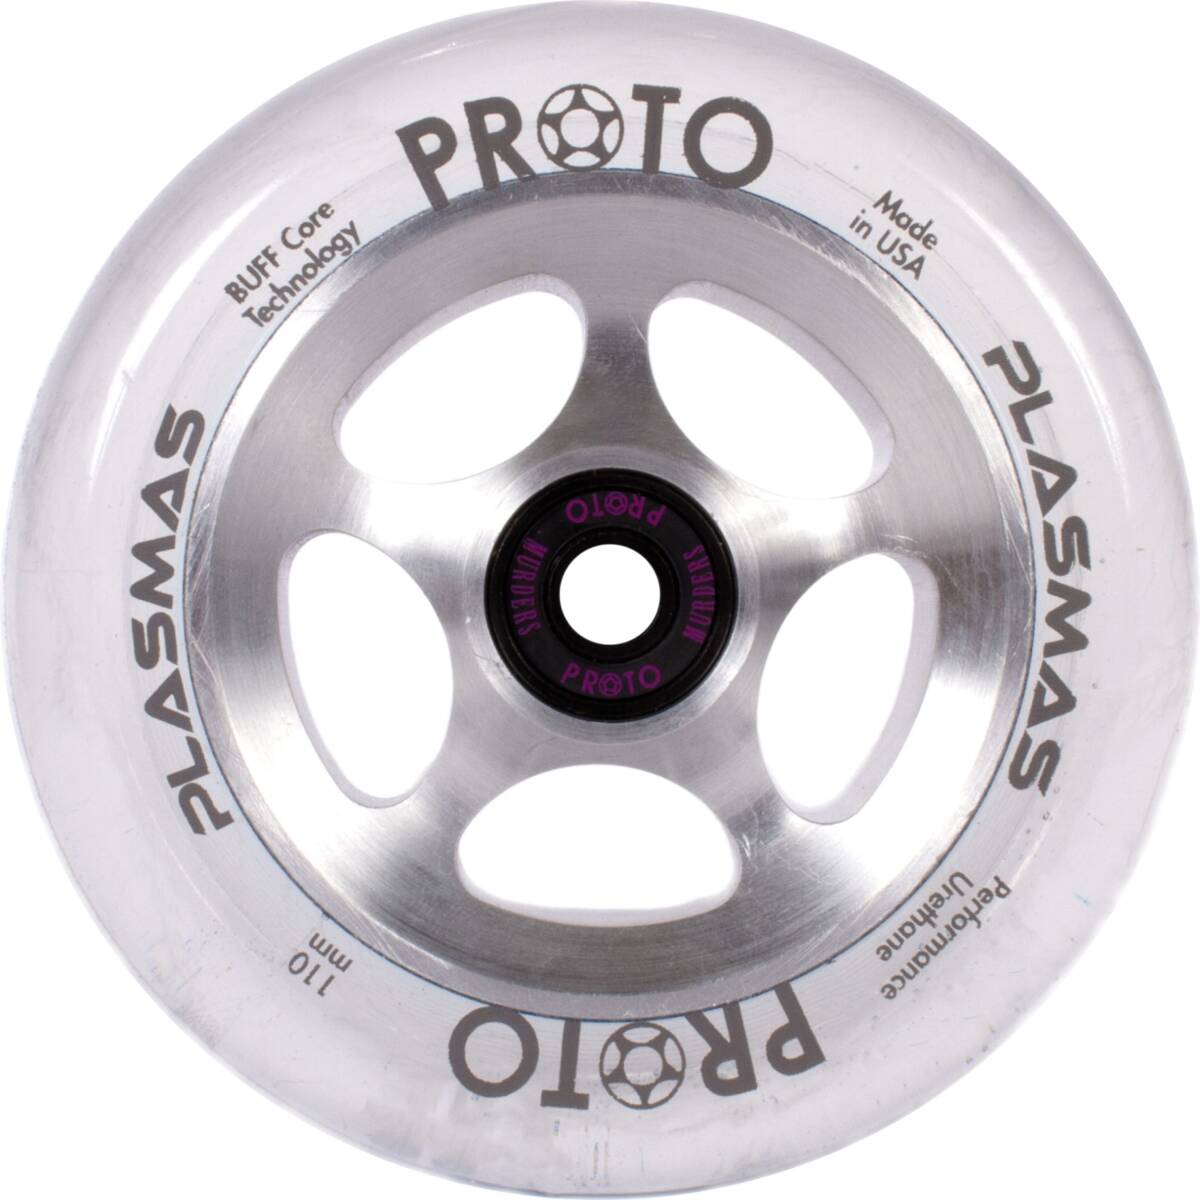 An image of Proto Plasma 110mm Scooter Wheels  - Starlight